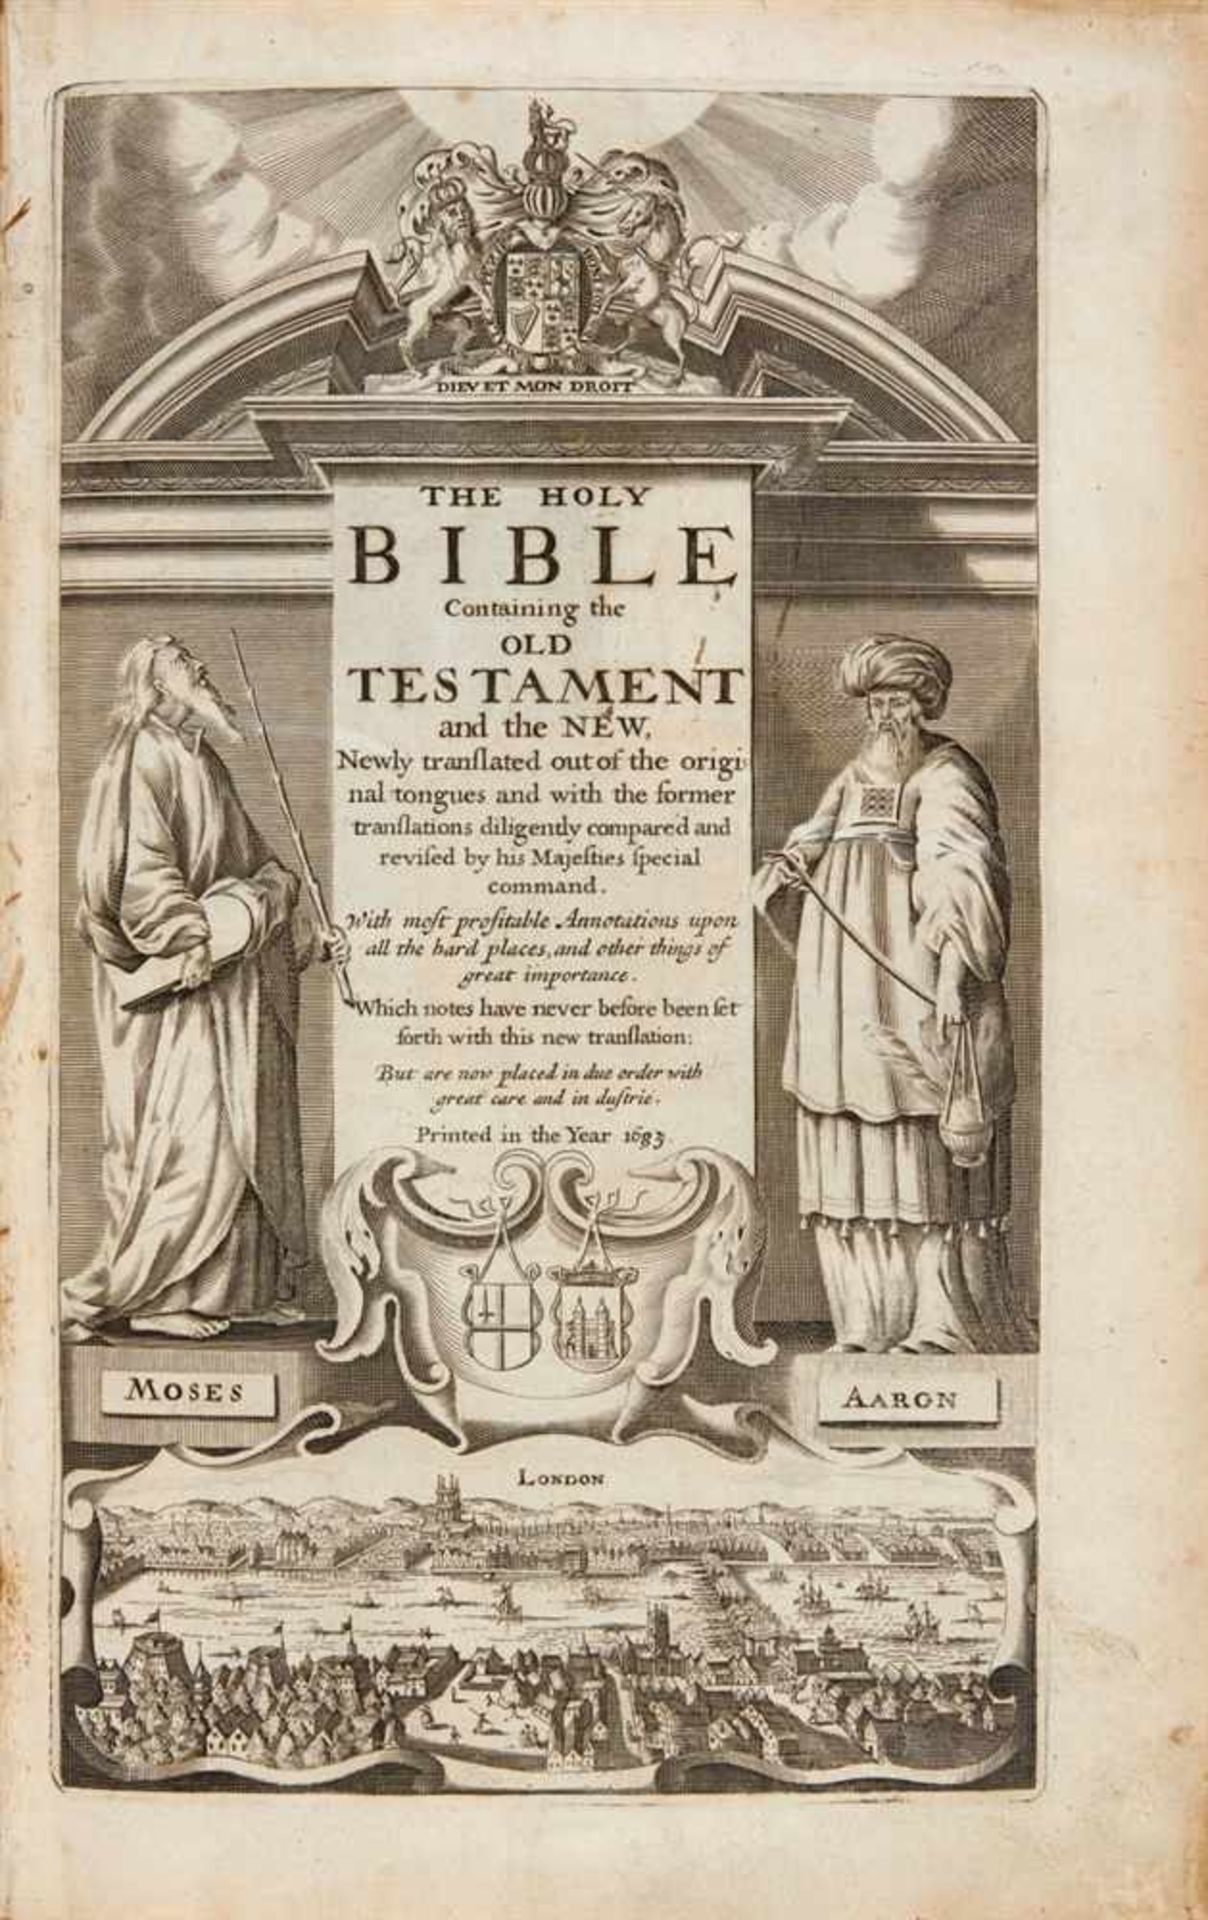 Biblia anglica. - The Holy Bible containing the Old Testament and the New, newly translated out of